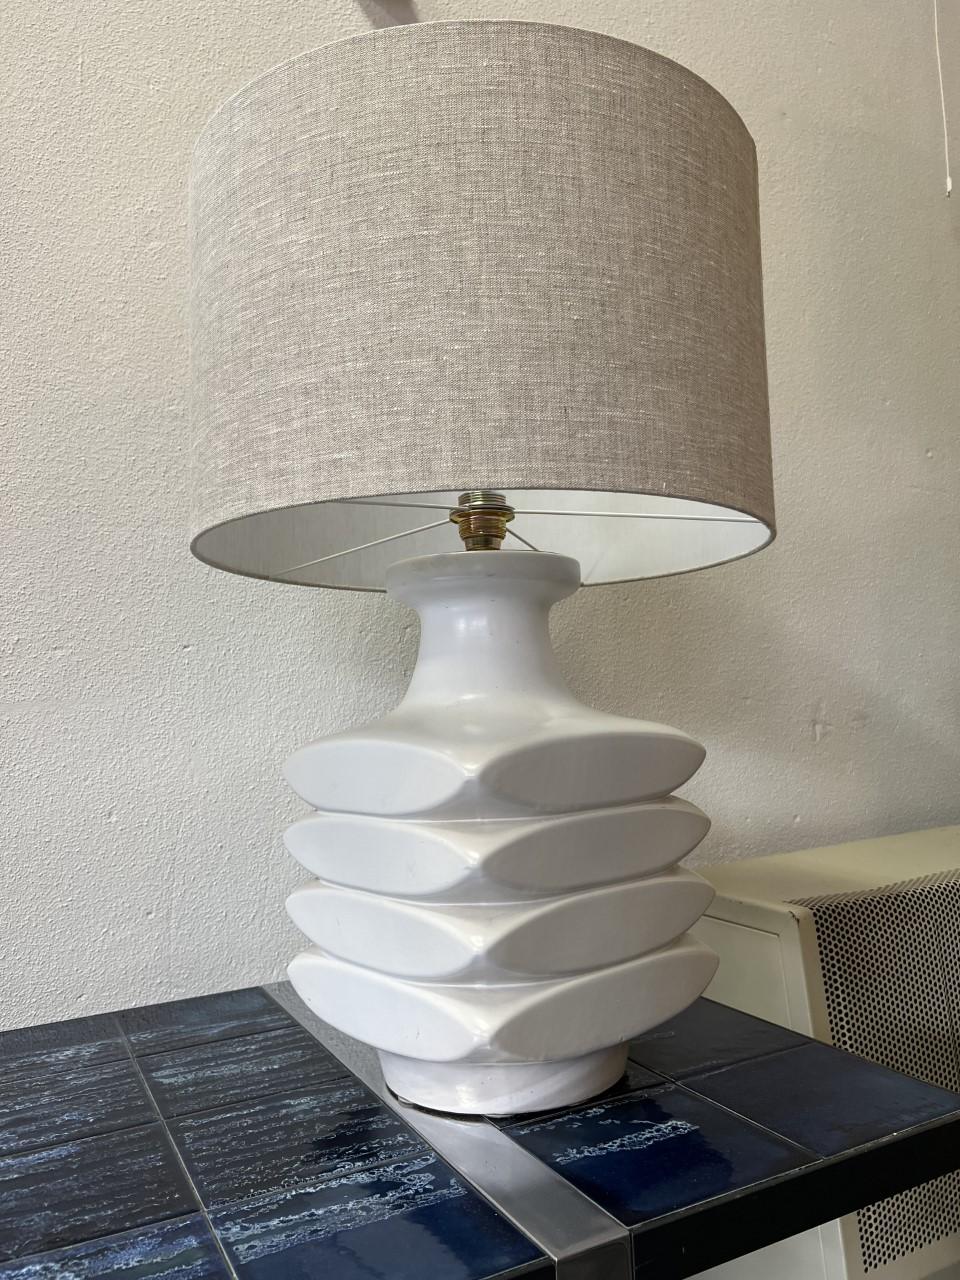 Large white ceramic table lamp designed by Cari Zalloni in the 1970s in a beautiful vintage condition.
Contemporary Brutalist design made in West-Germany.
Measures 28 x 28 x 42 cm without shade.
Lamp shade is not included.